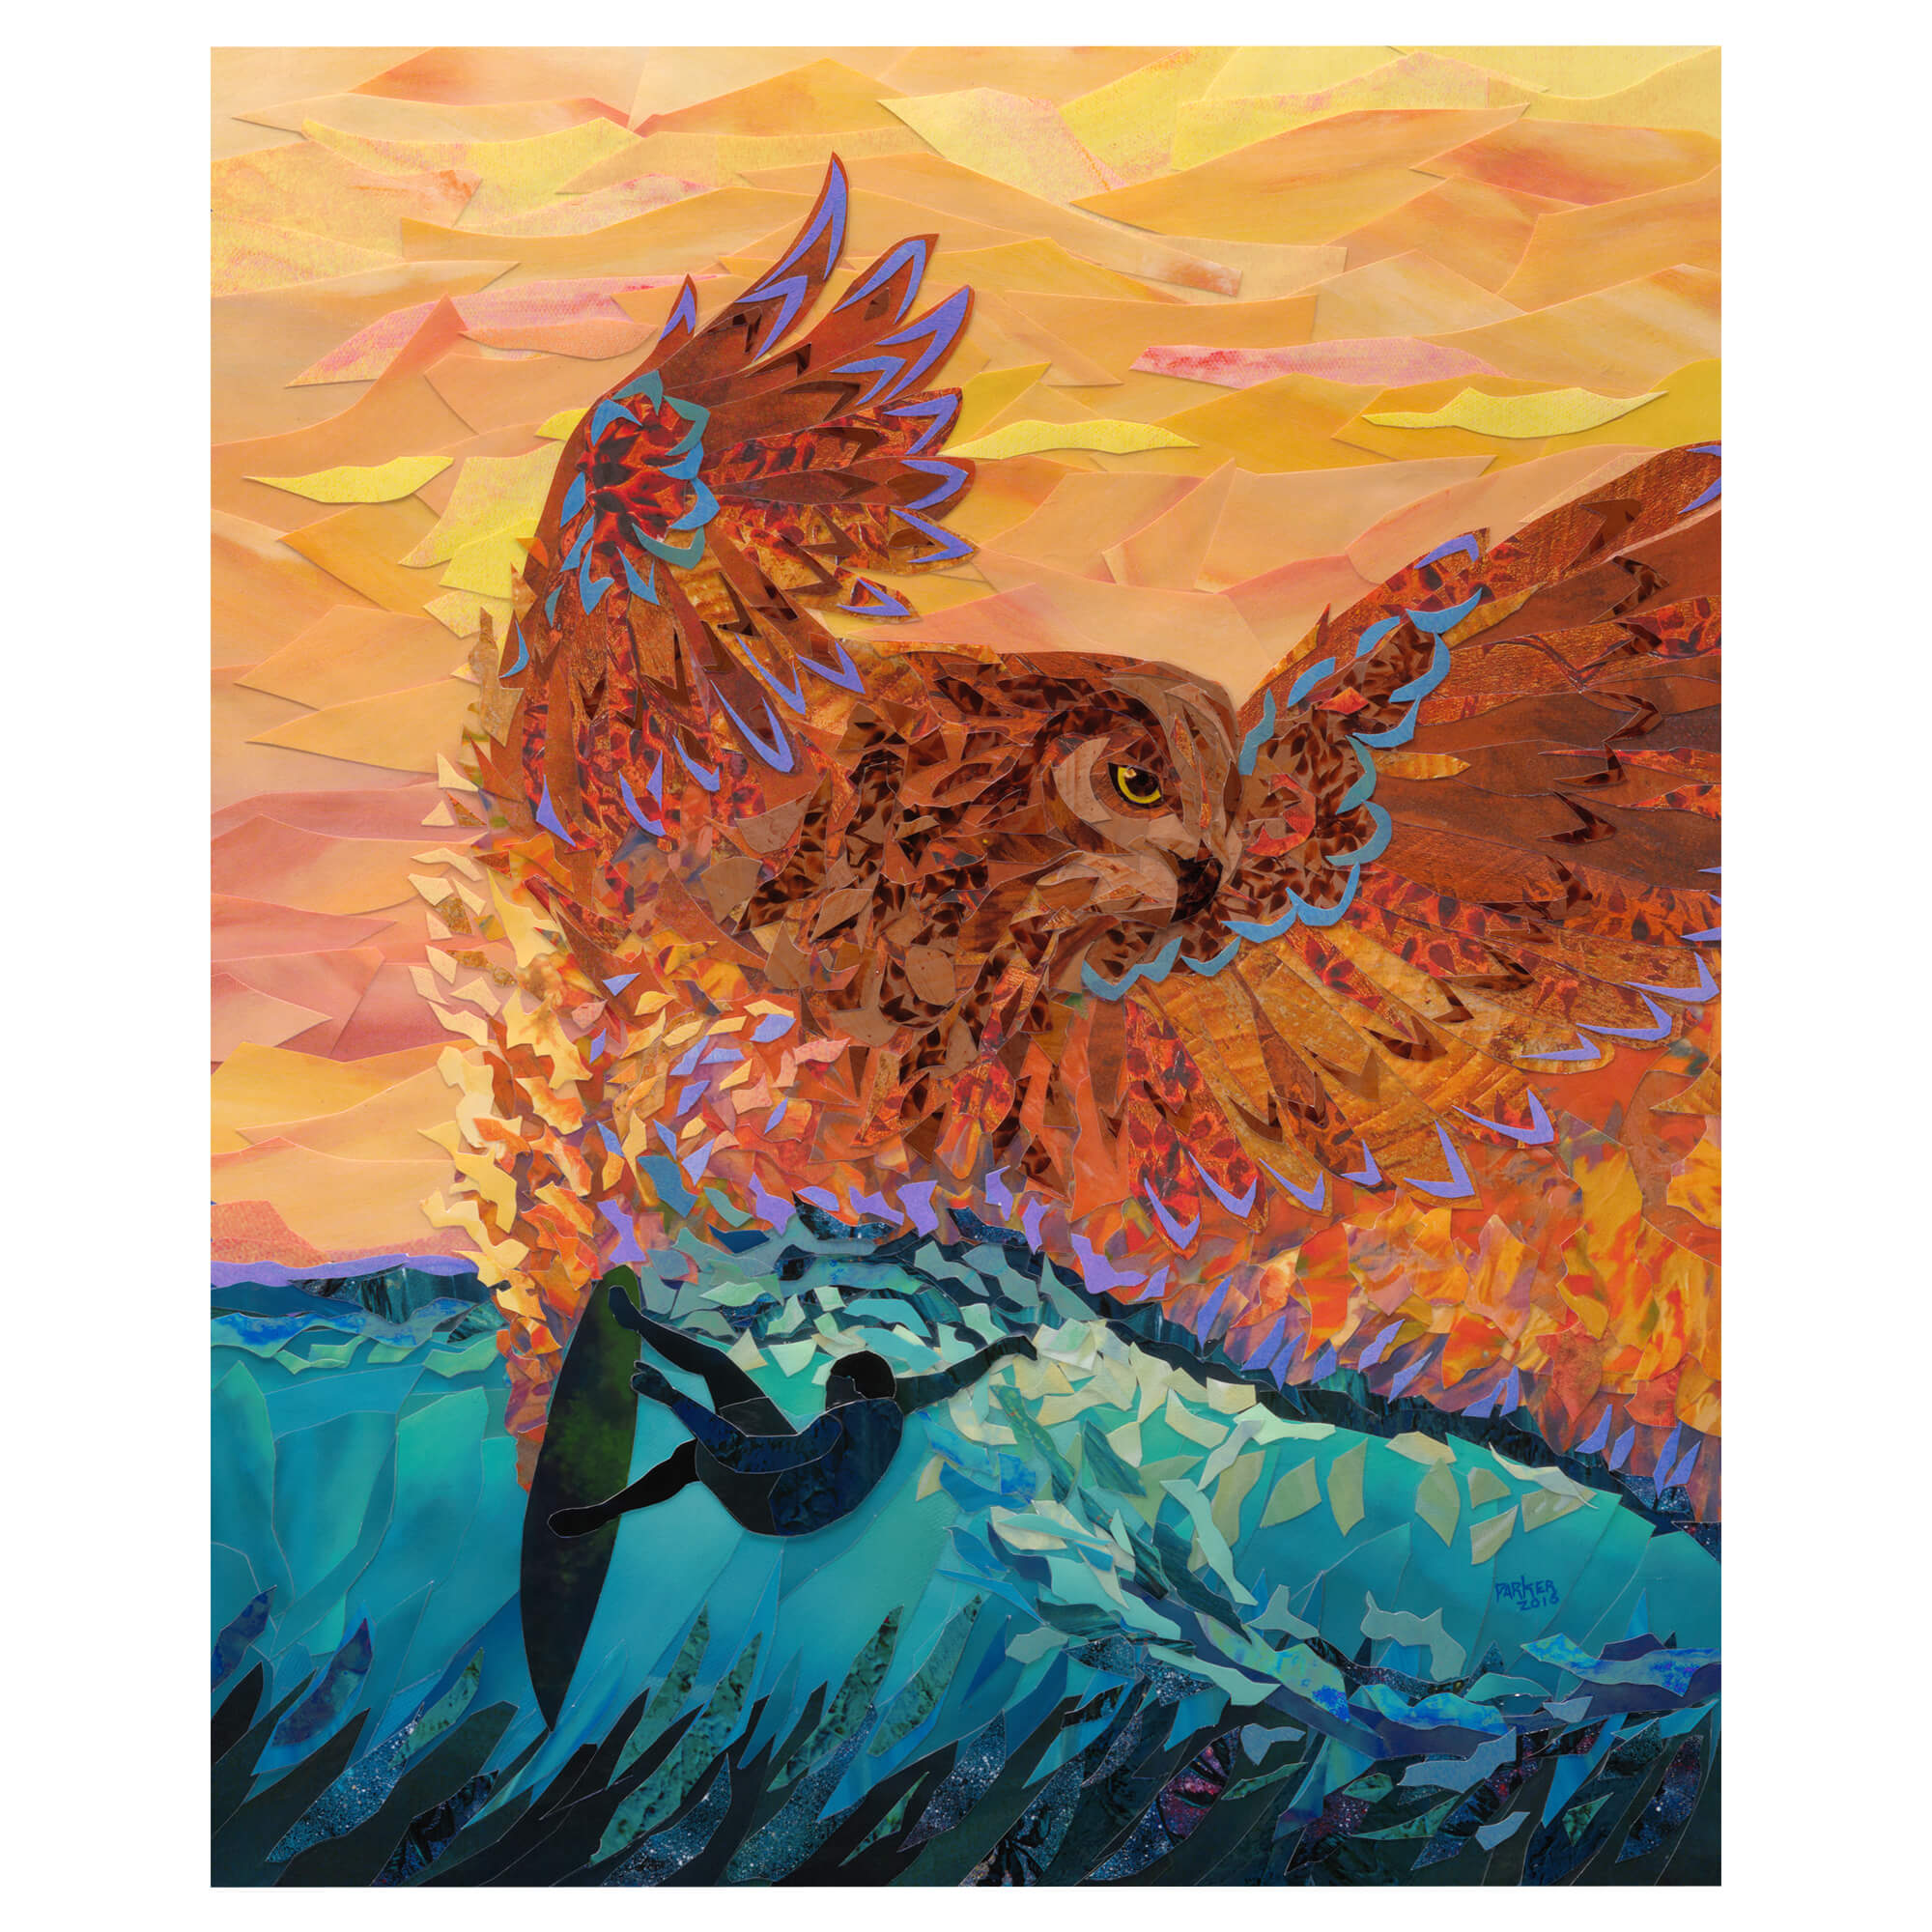 A matted art print featuring a collage of a surfer riding the epic wave of Hawaii and a vibrant orange-hued owl by Hawaii artist Patrick Parker